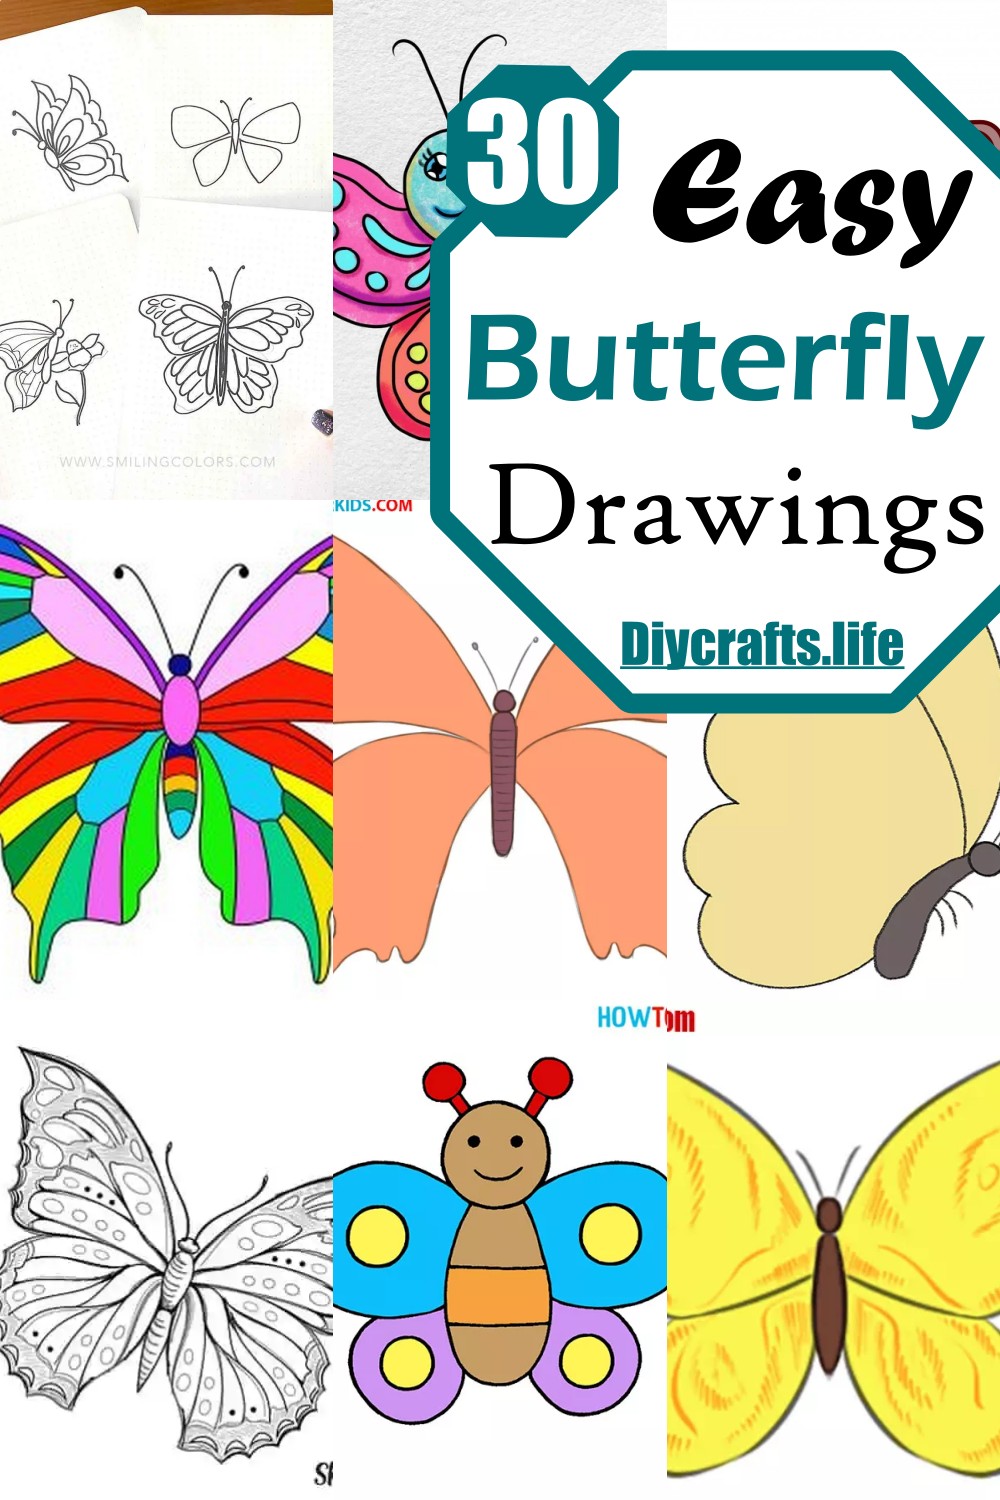 Easy Drawings For Kids Butterfly - ClipArt Best-omiya.com.vn